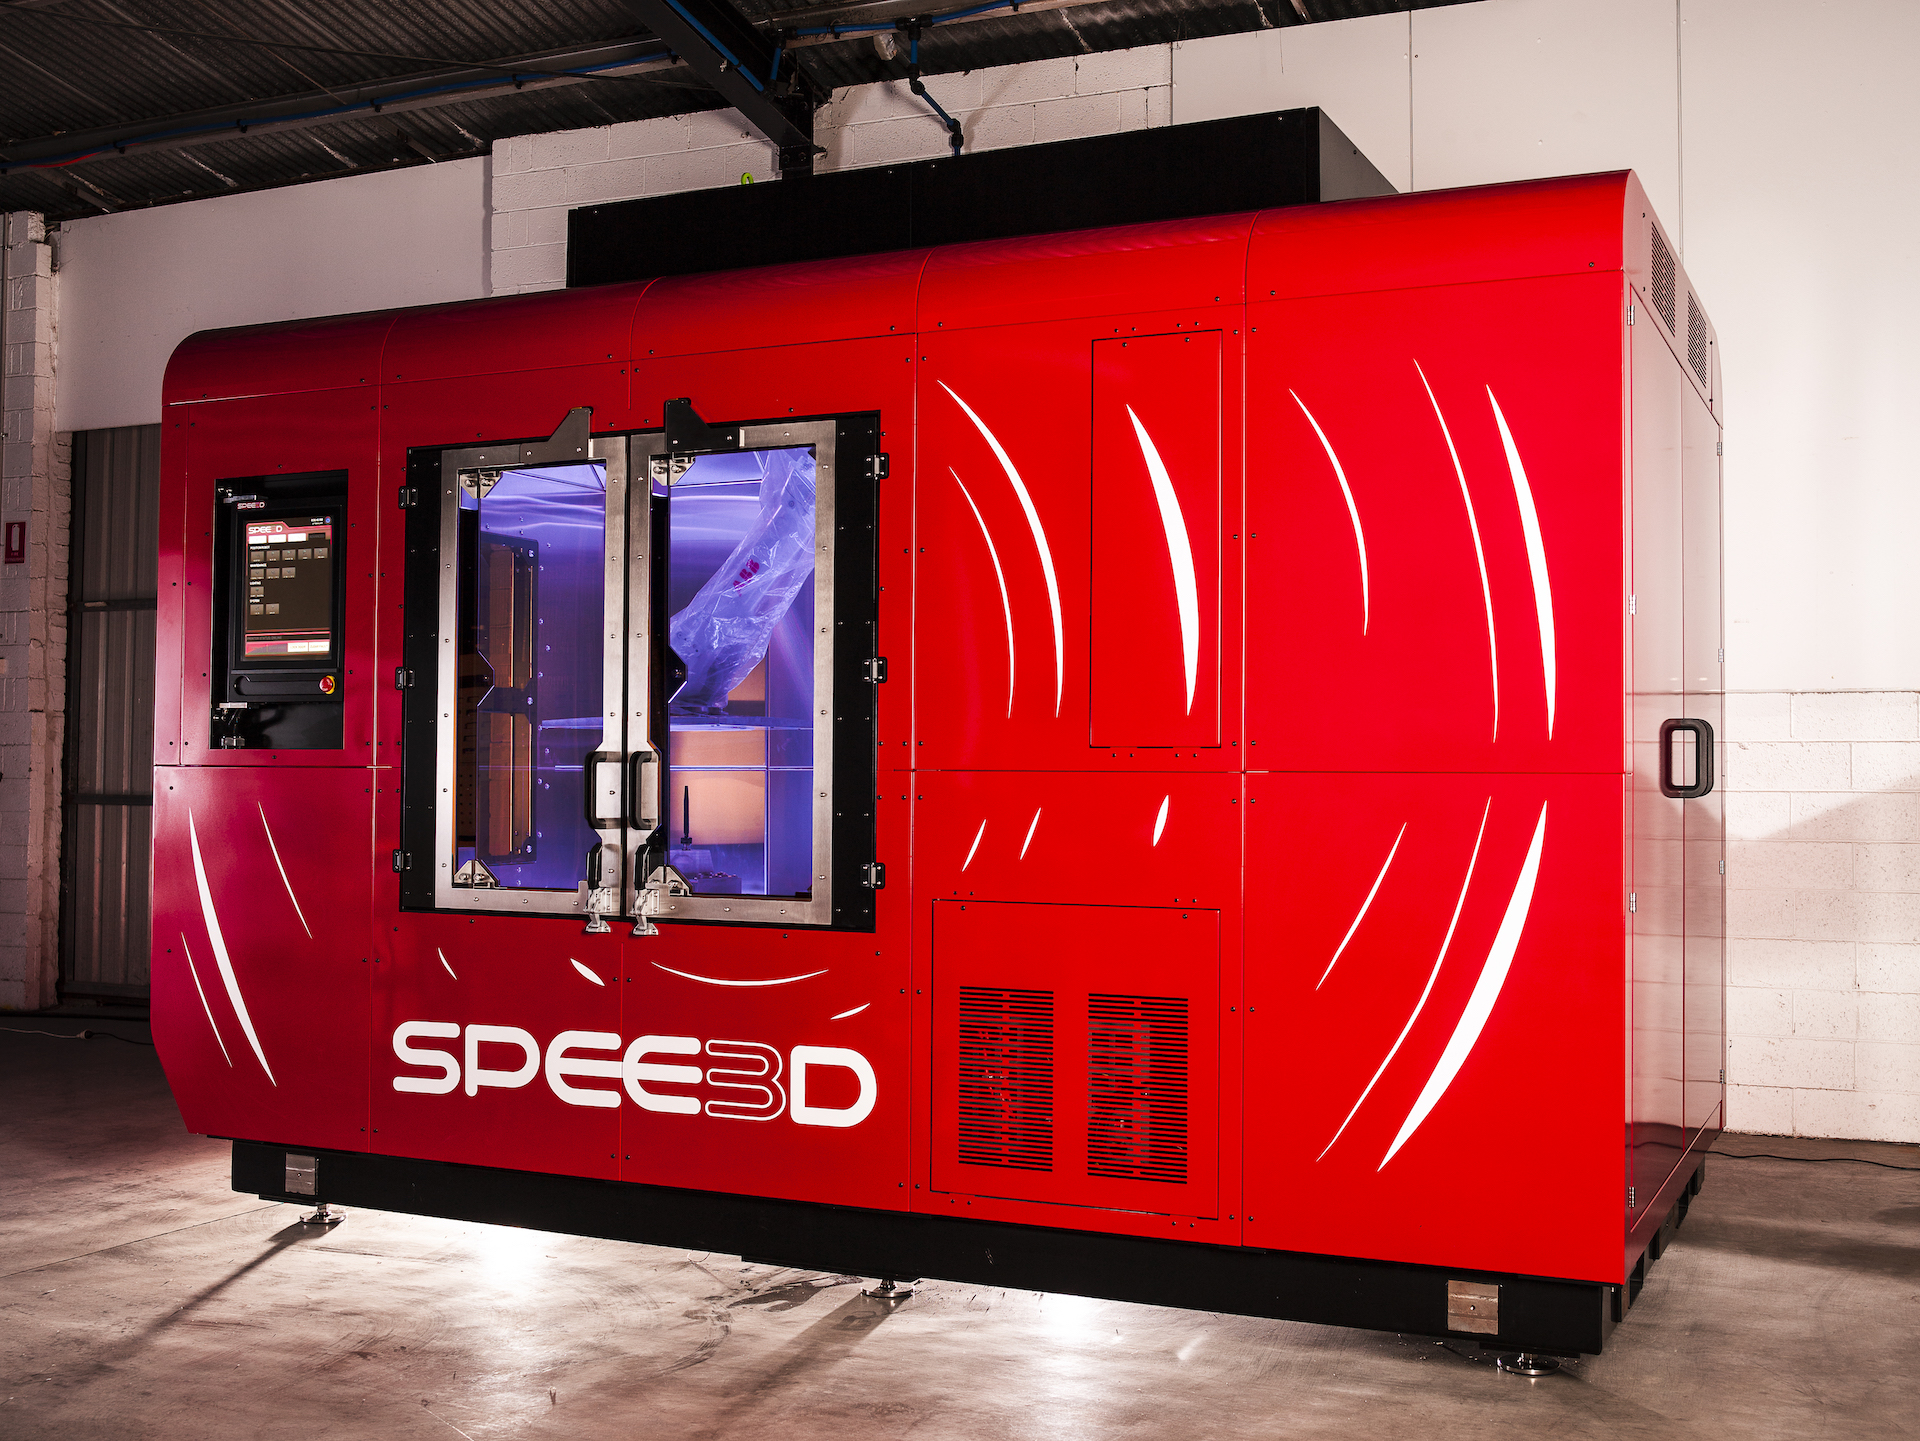 SPEE3D's WarpSPEE3D Printer at the New Jersey Innovation Institute (NJII)